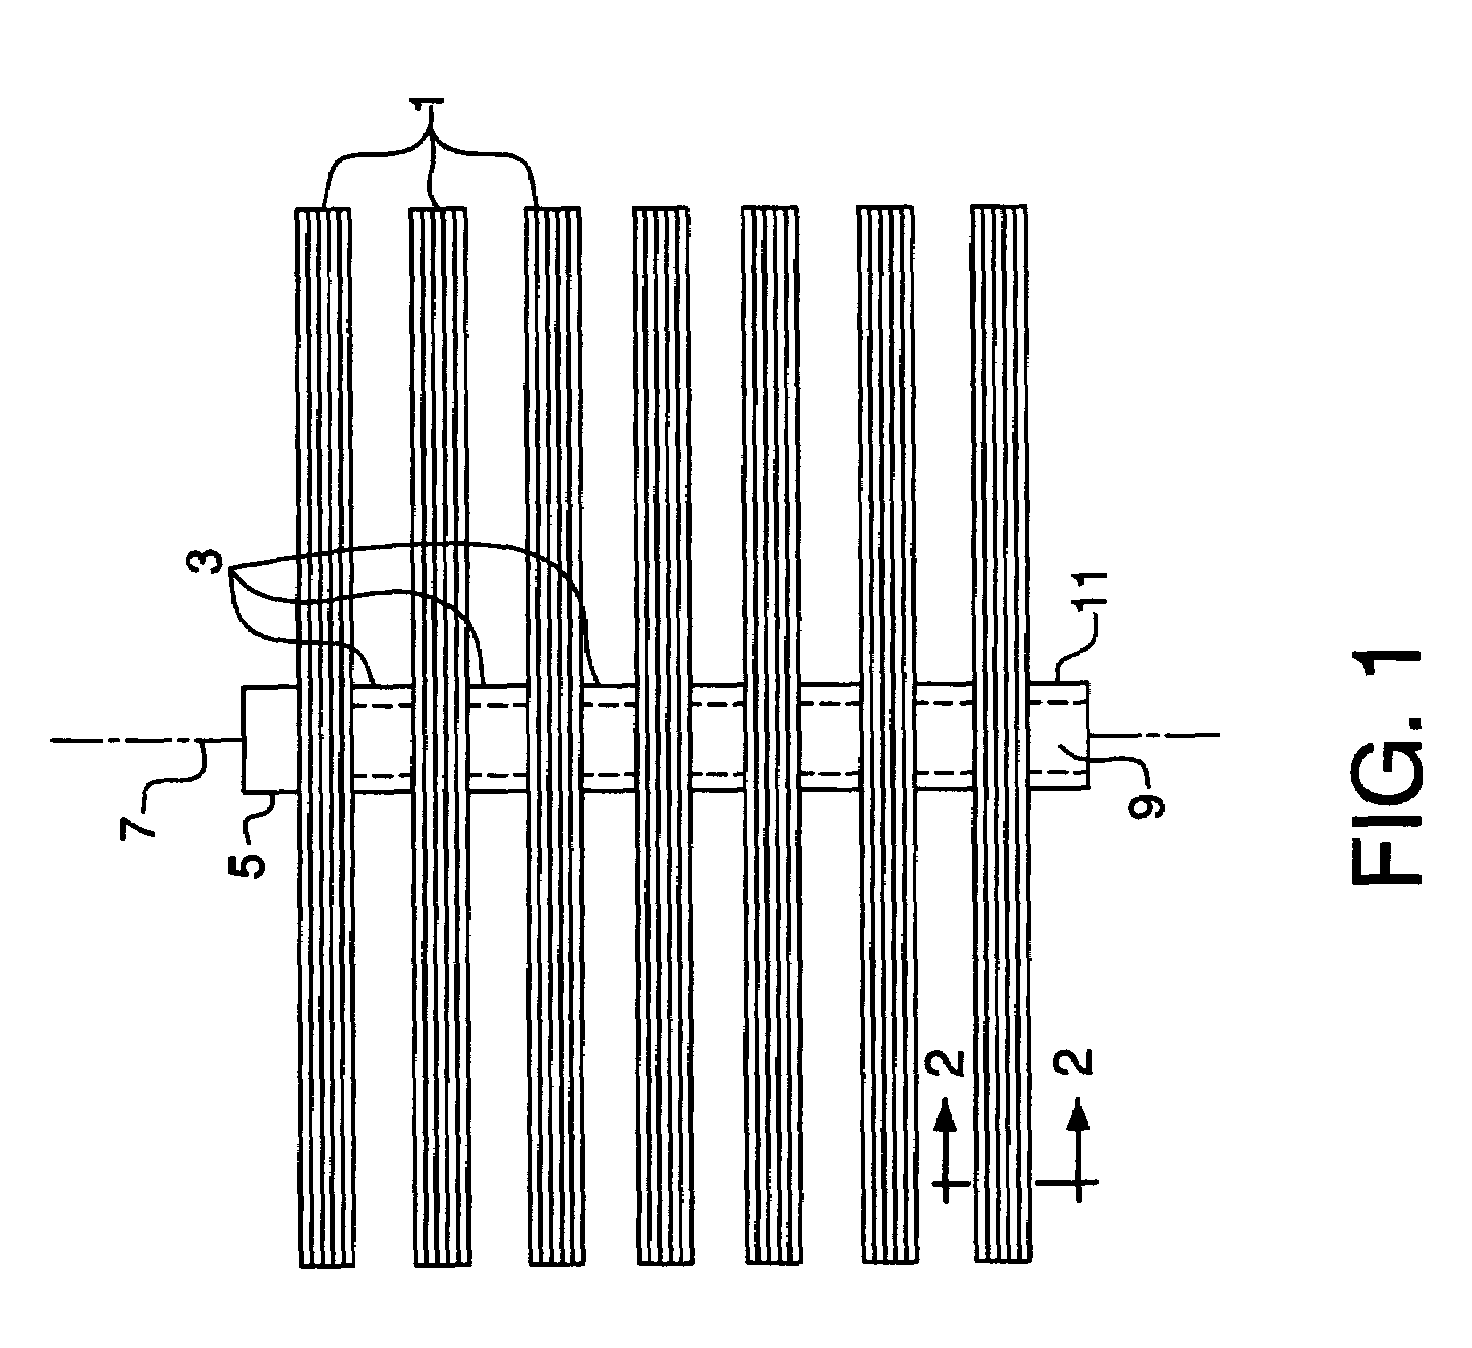 Ion transport membrane module and vessel system